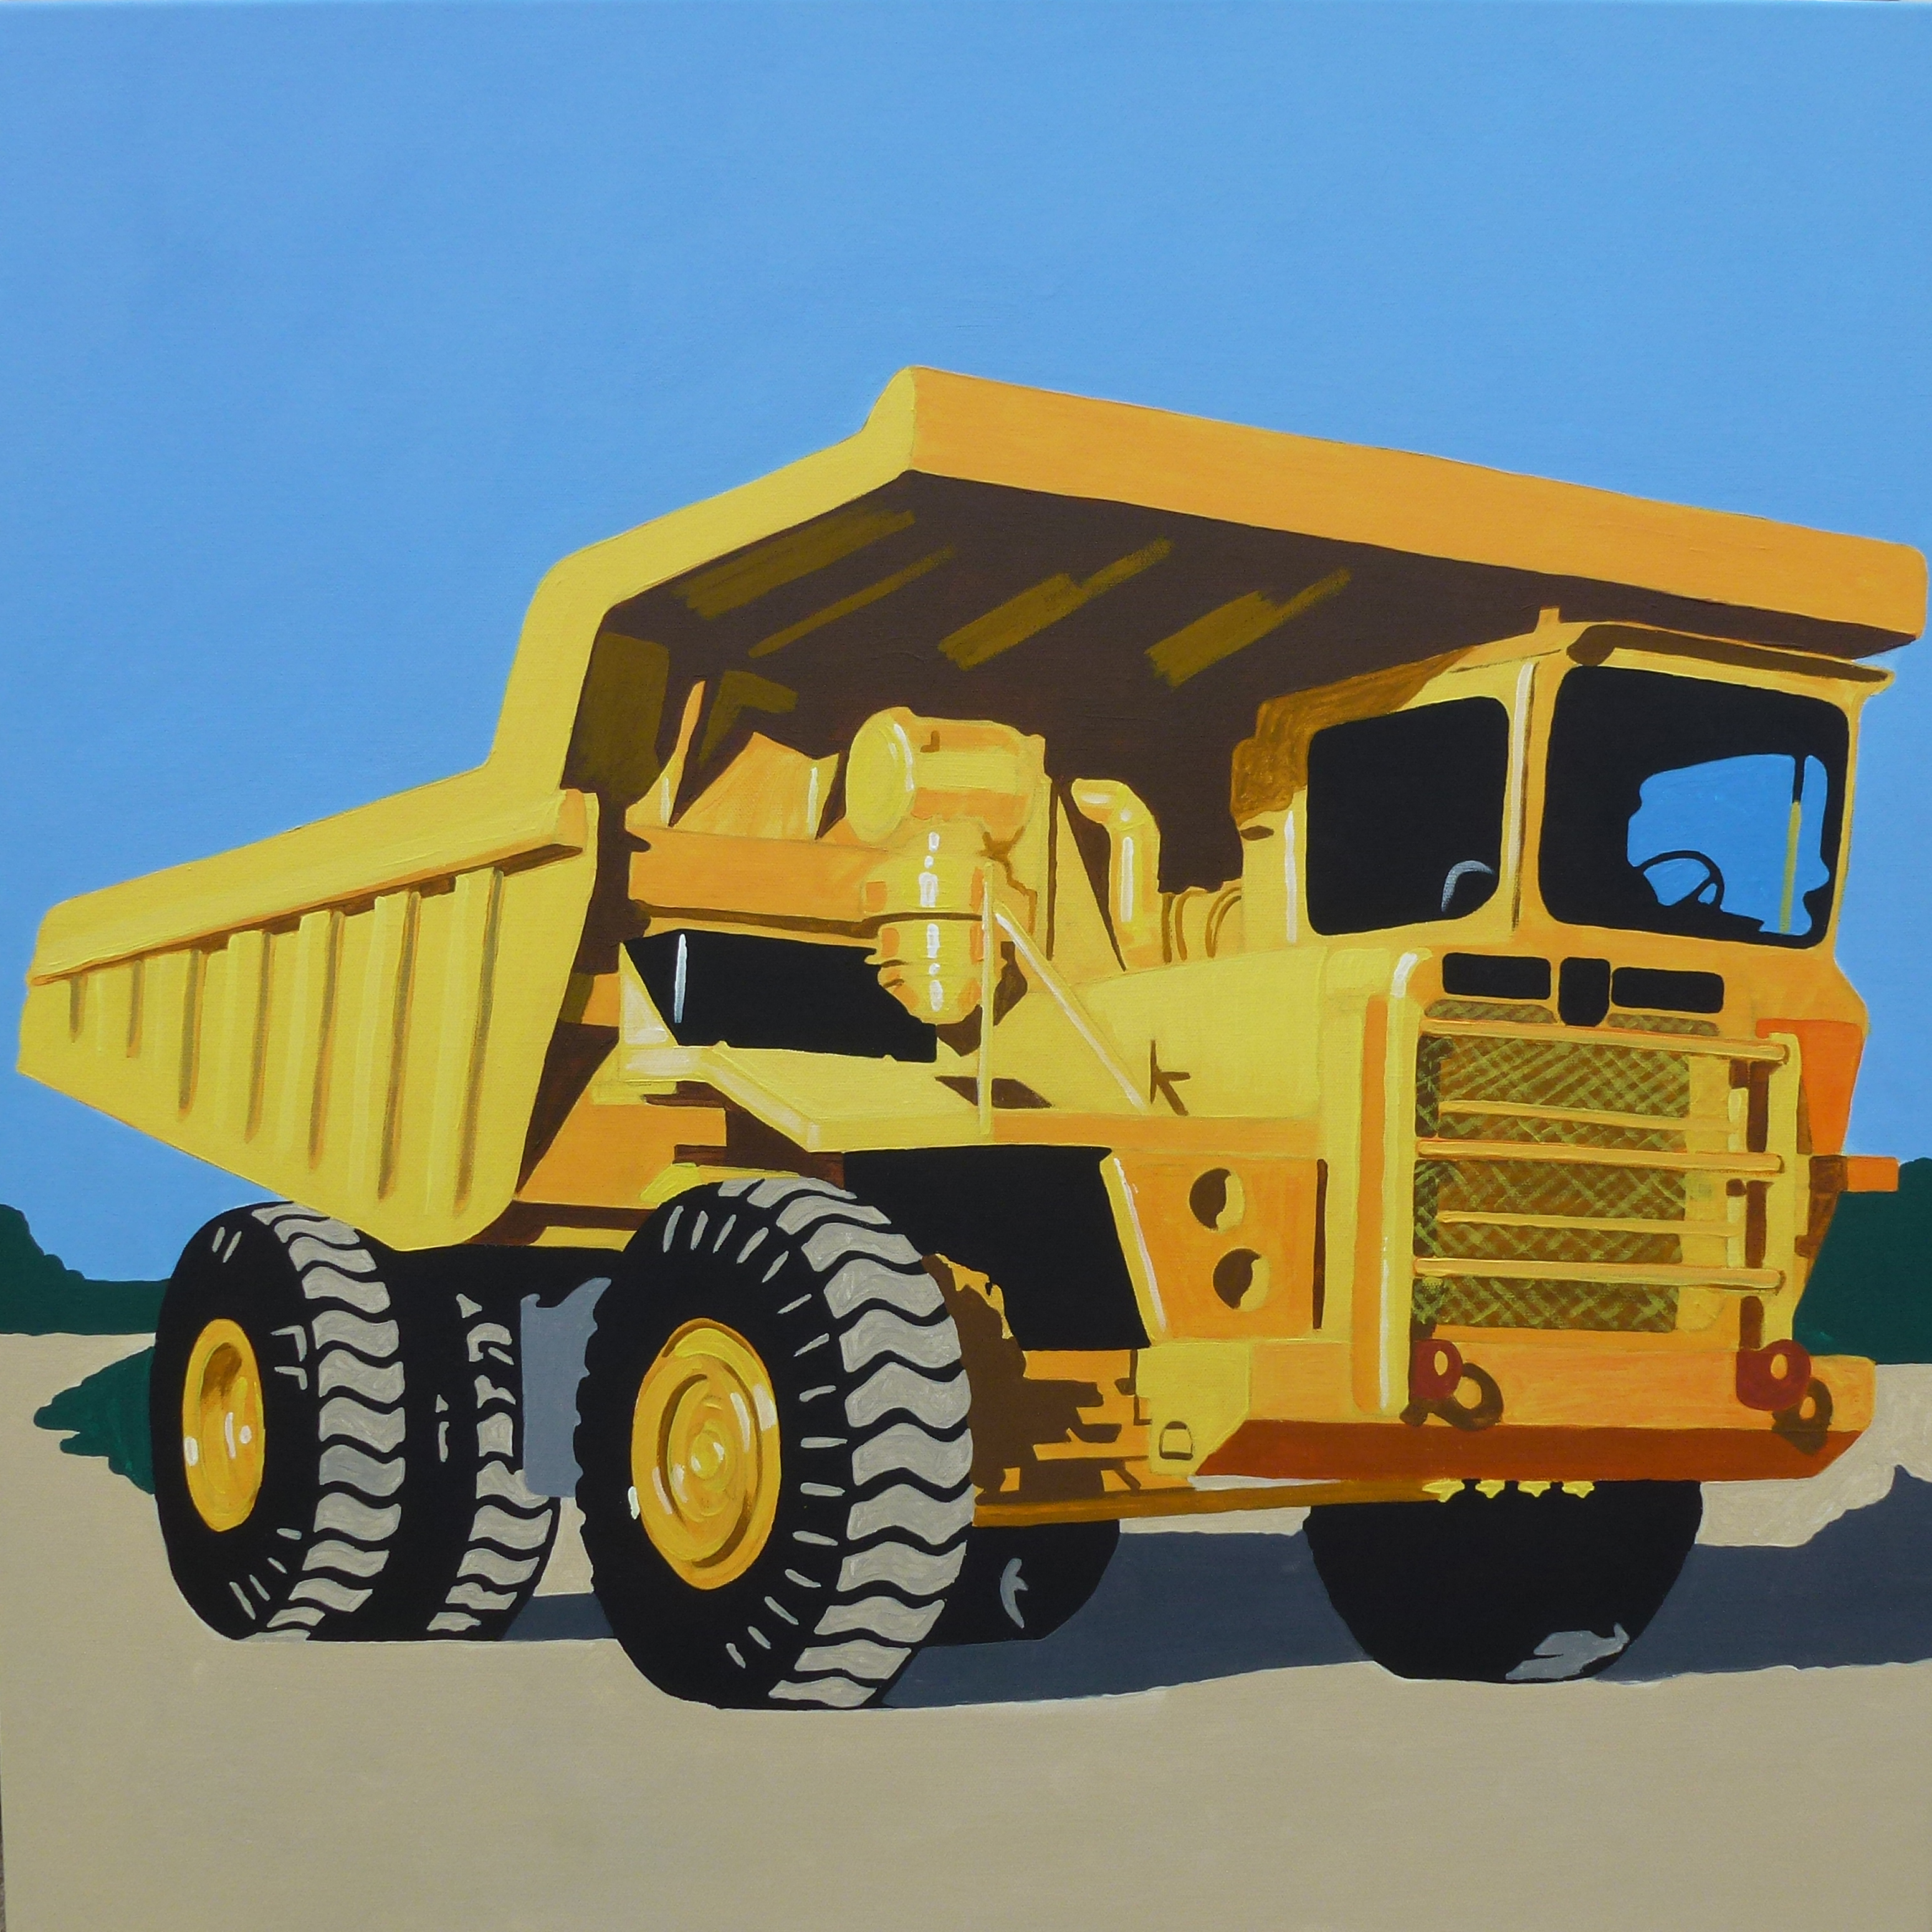 contemporary fine art acrylic painting of a yellow quarry truck in the style of Ladybird book illustrations by saatchiart artist Christian Dodd